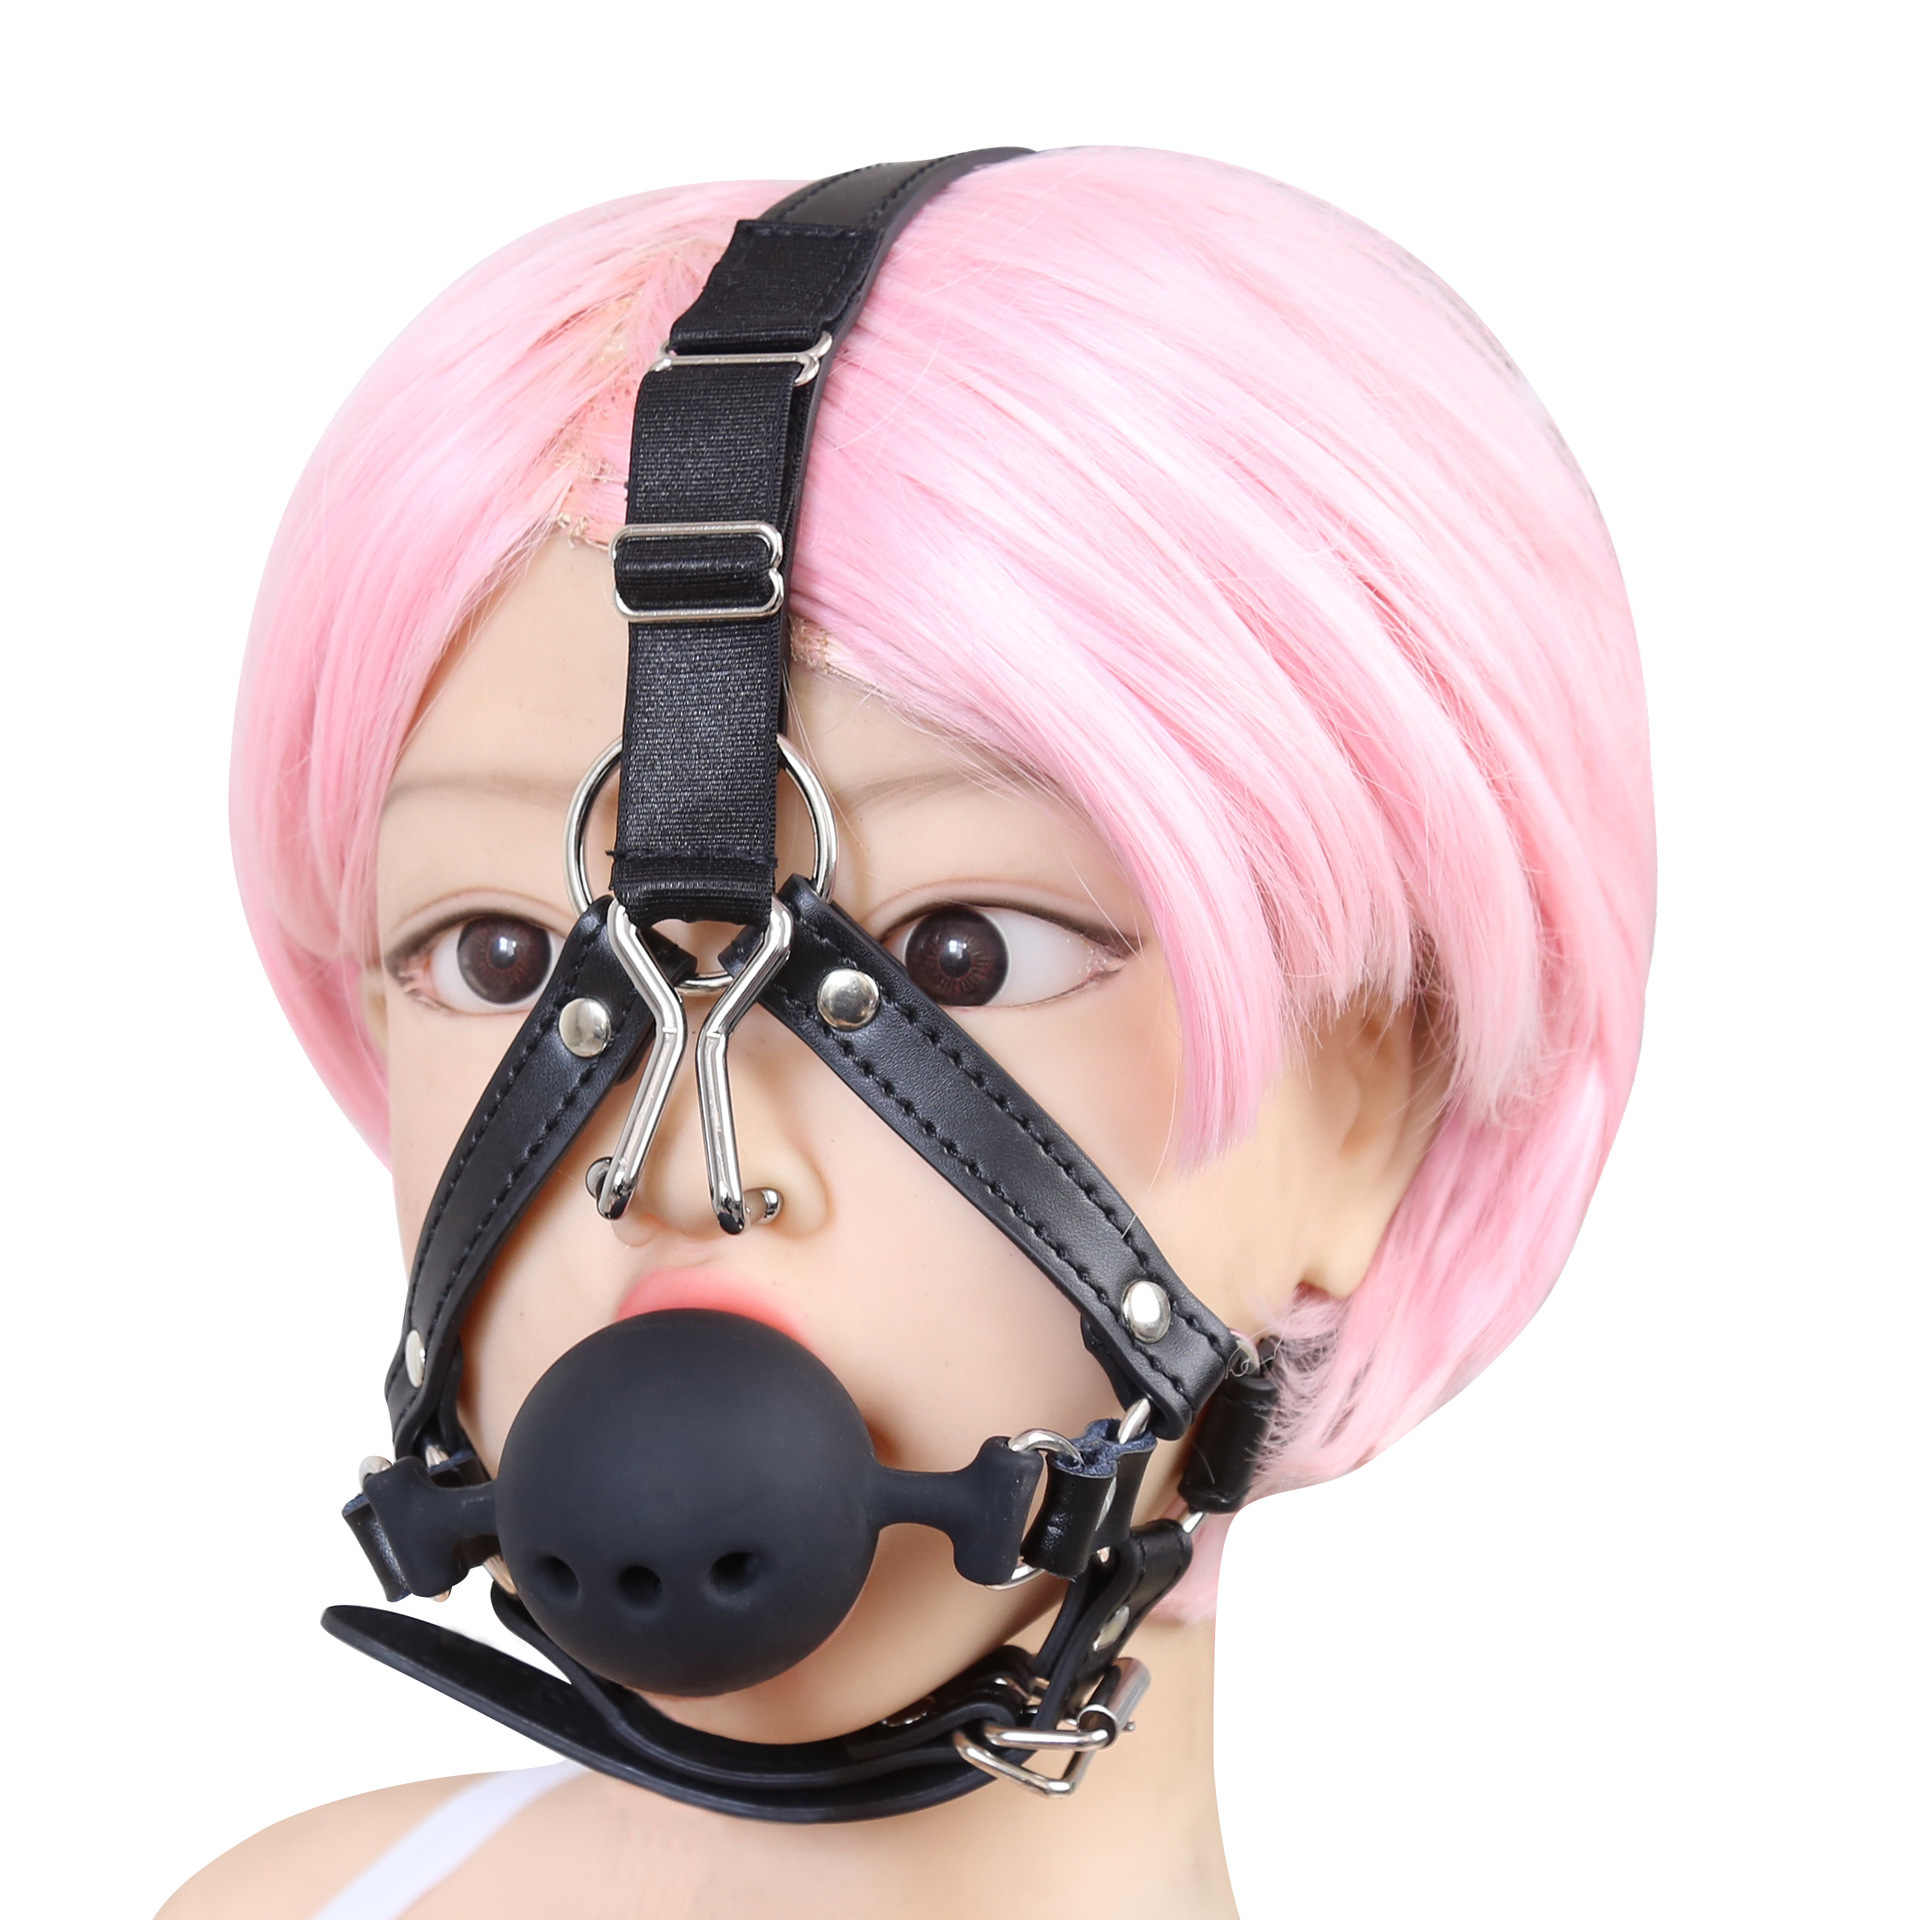 Snickerdoodle reccomend with blindfolded nose plugged gagged